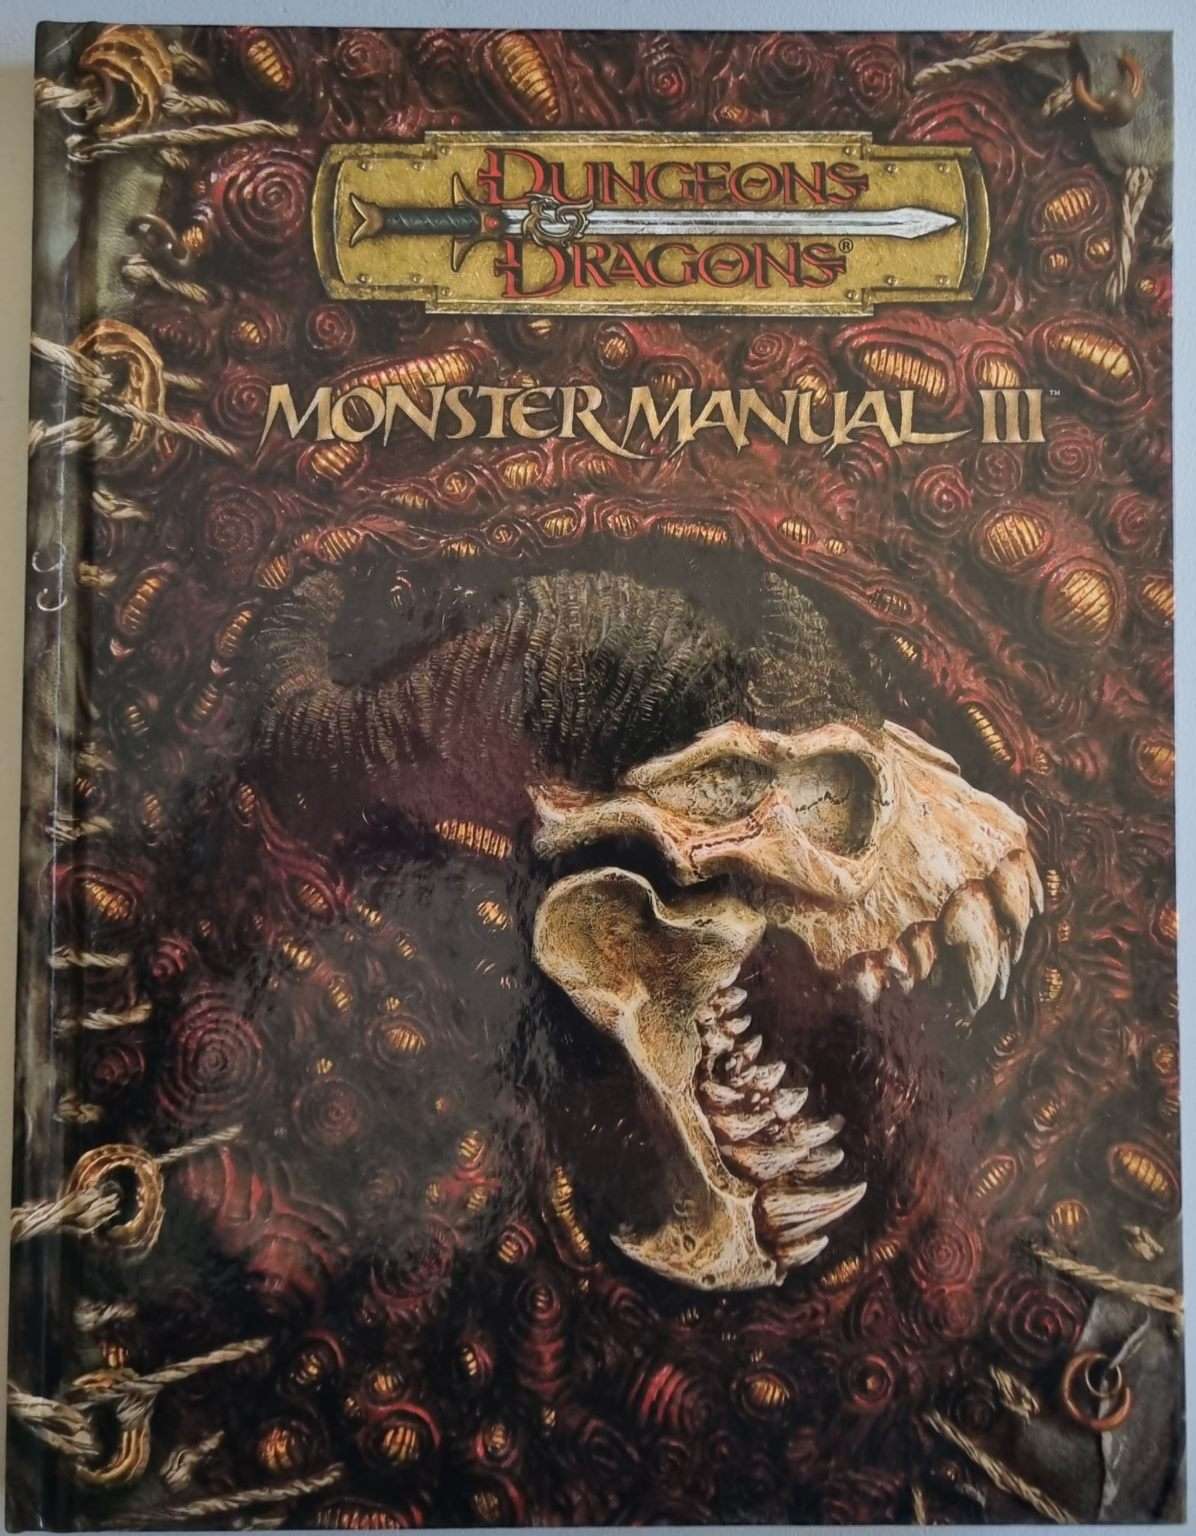 Dungeons and Dragons - Monster Manual III 3.5 e